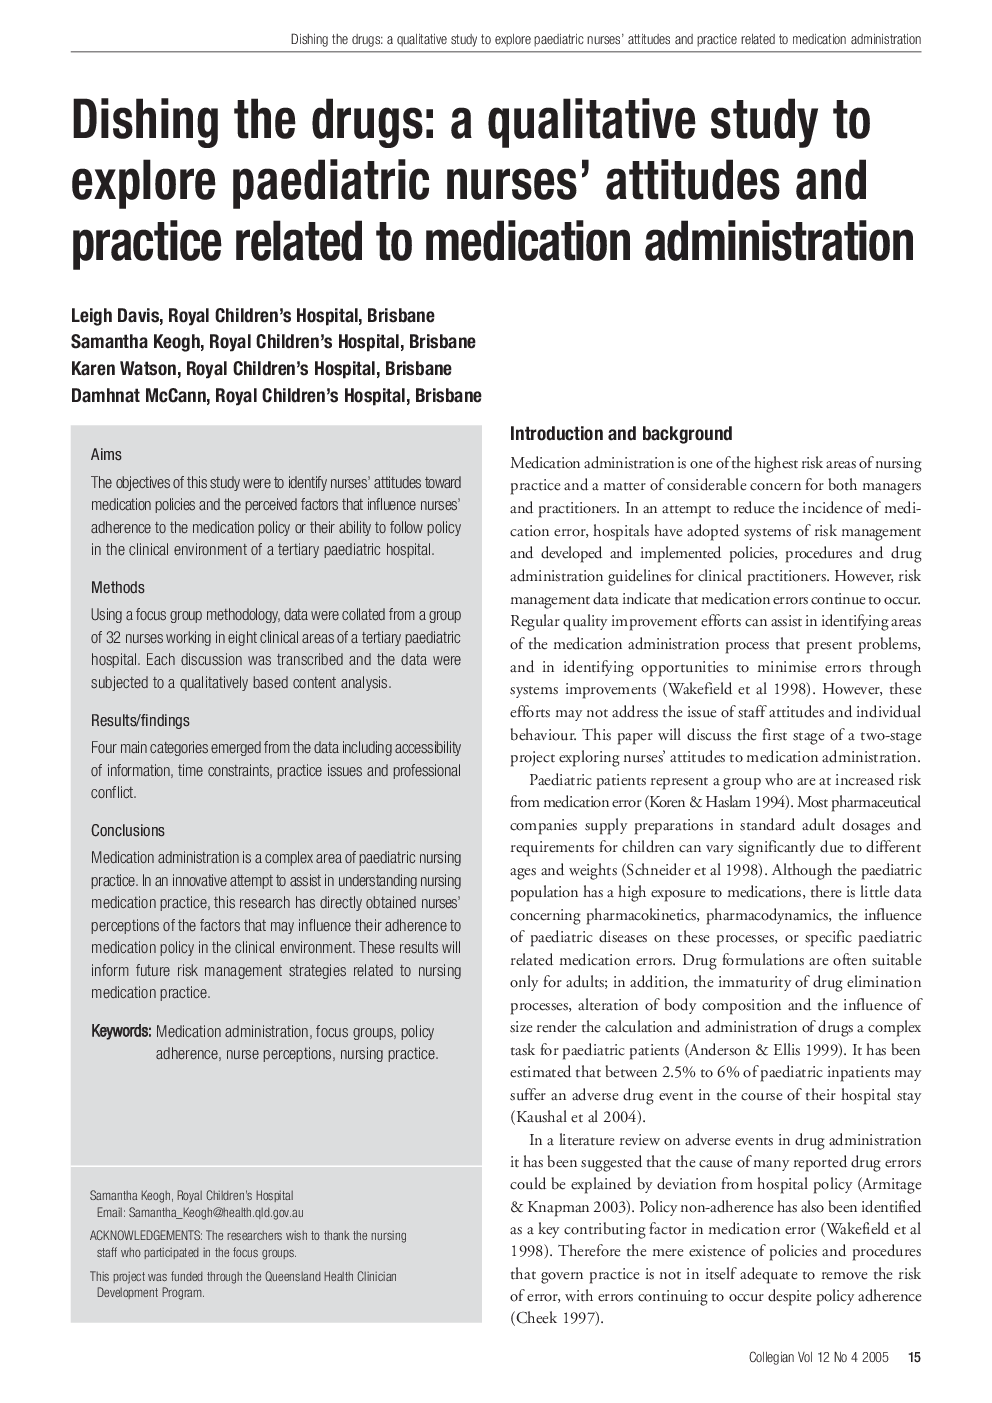 Dishing the drugs: a qualitative study to explore paediatric nurses' attitudes and practice related to medication administration